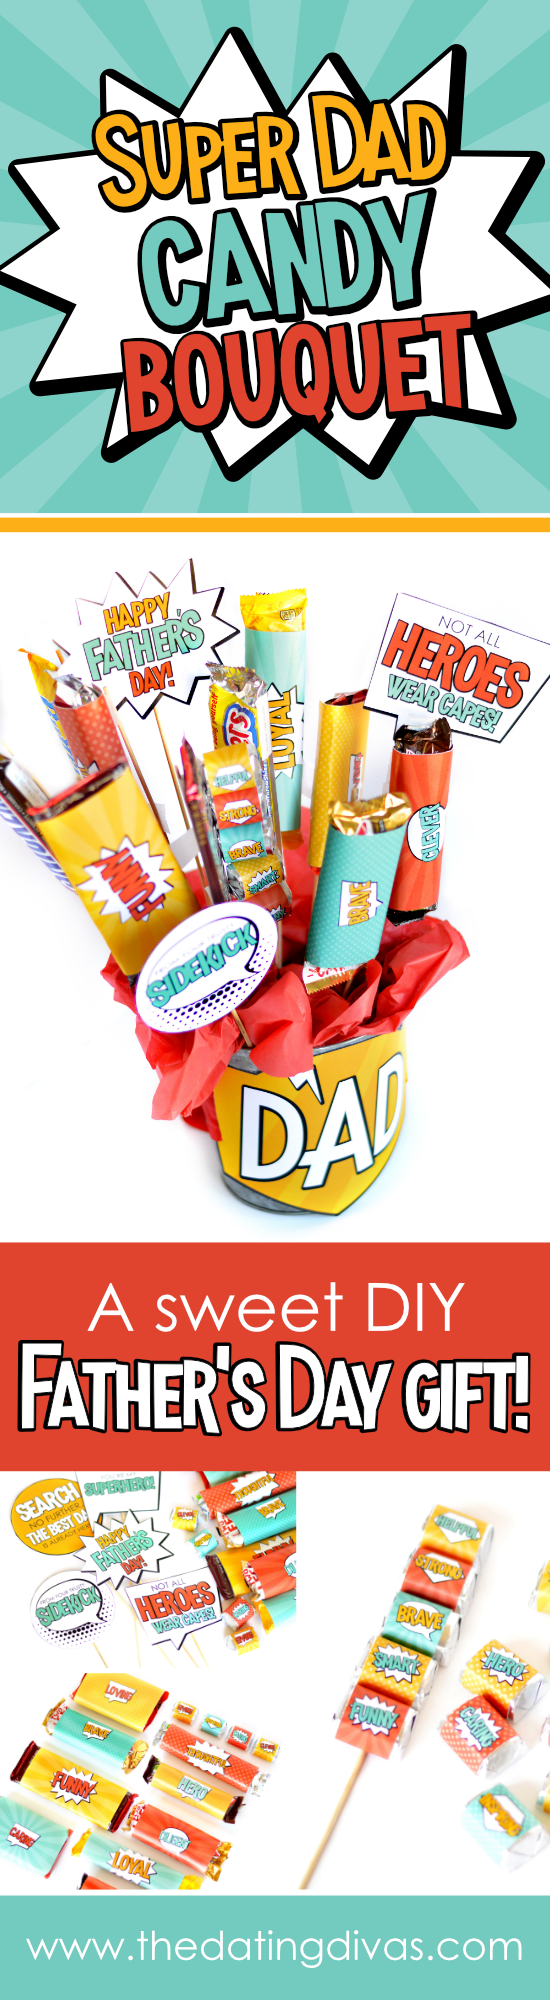 Stop desperately searching for a thoughtful Father's Day gift and give a homemade Father's Day gift that he's sure to love. Get everything you need to make a candy bar gift basket bouquet that's filled with his favorite treats and kind words that describe him as a dad, making it delicious and meaningful! #superherofathersday #superdad #candybouquet #fathersdaygift #giftbasketsformen